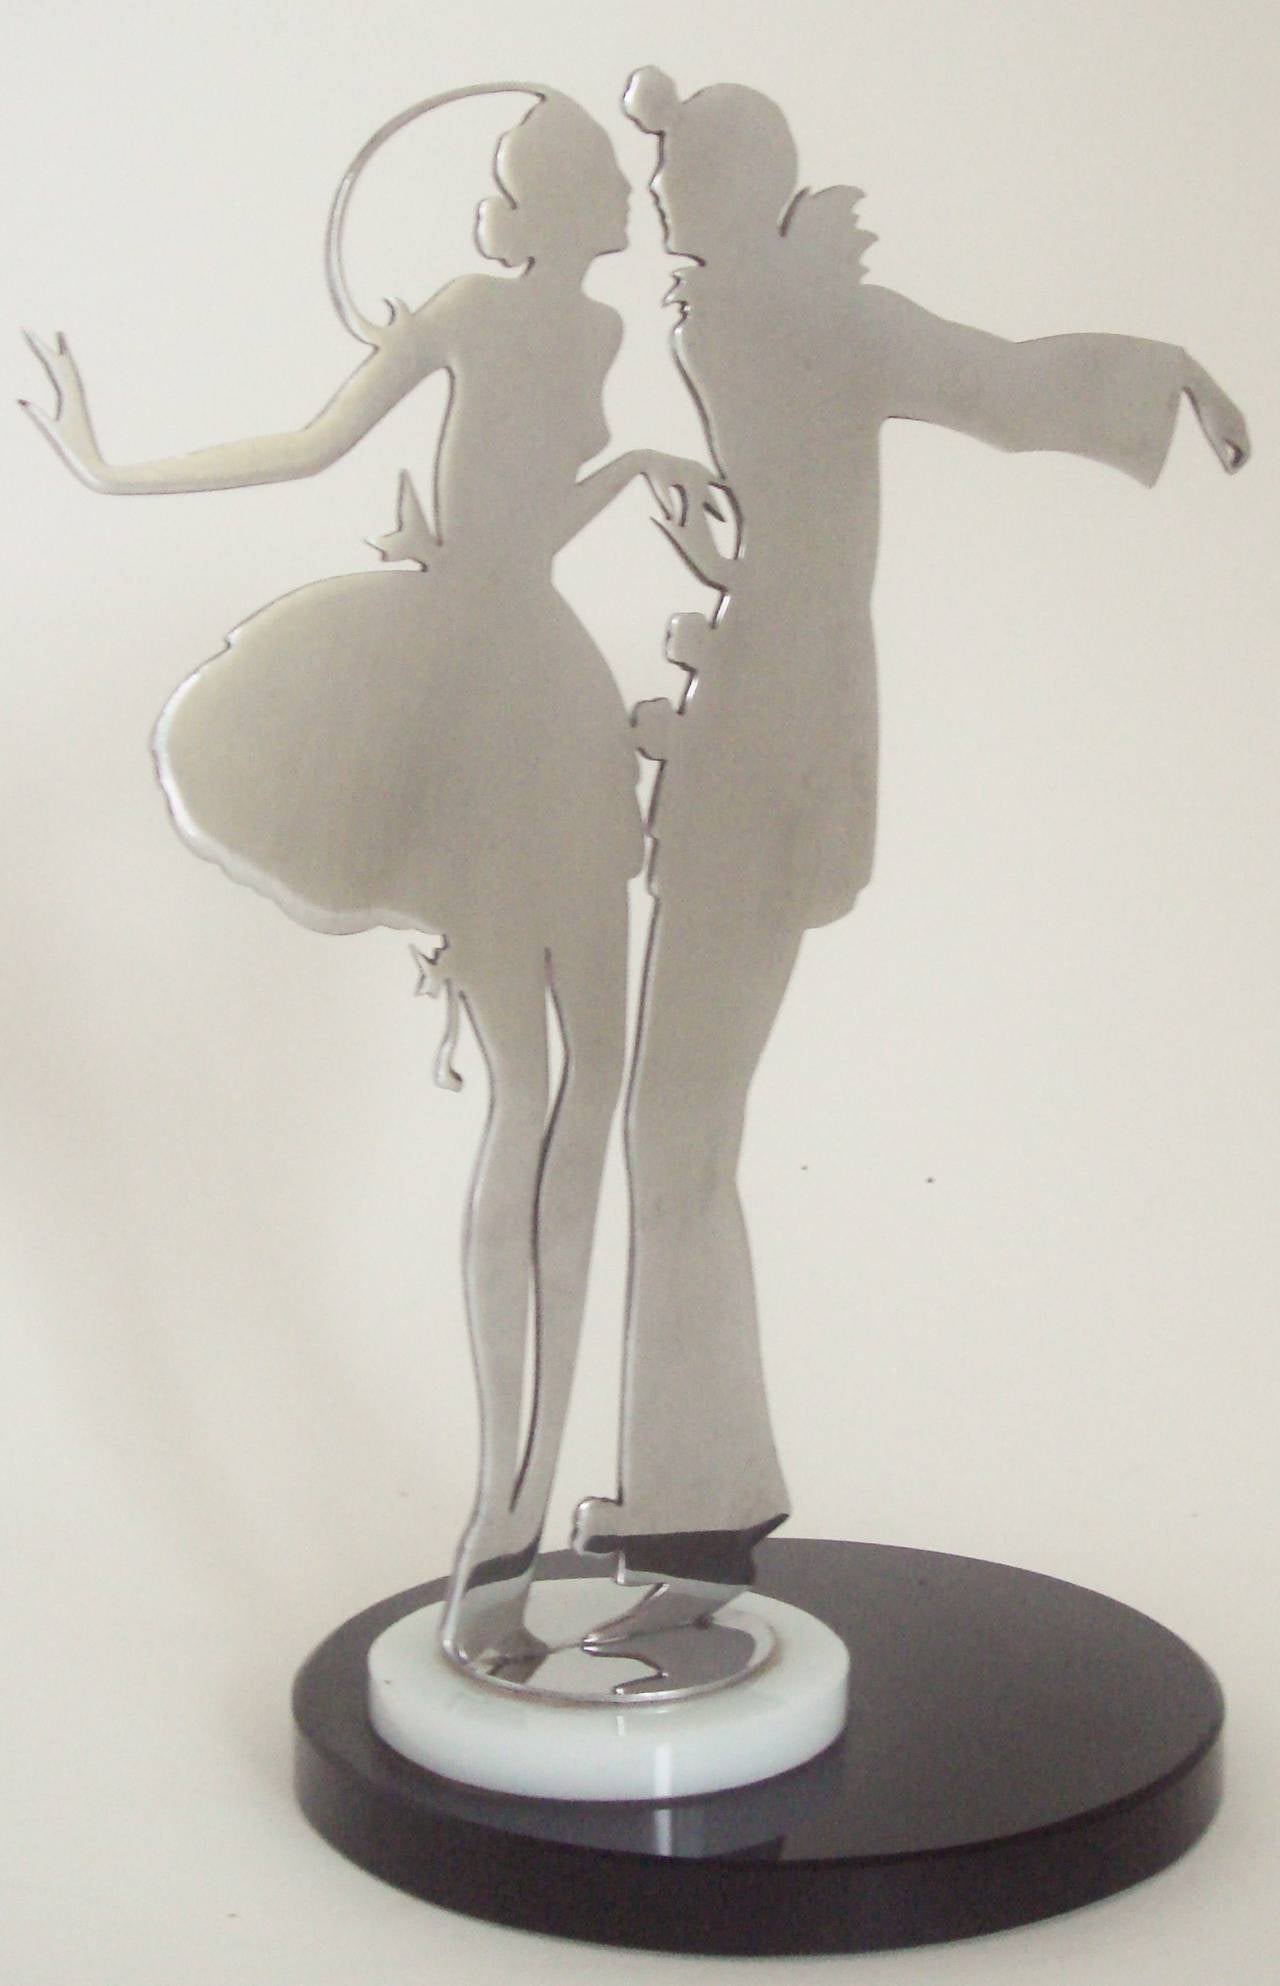 This fabulous French Art Deco jewelry store display stand features a beautifully delineated chrome Silhouette of Pierrot and Pierrette, both with their arms extended and their lips about to touch. The fingers of Pierrot's left hand are fashioned to